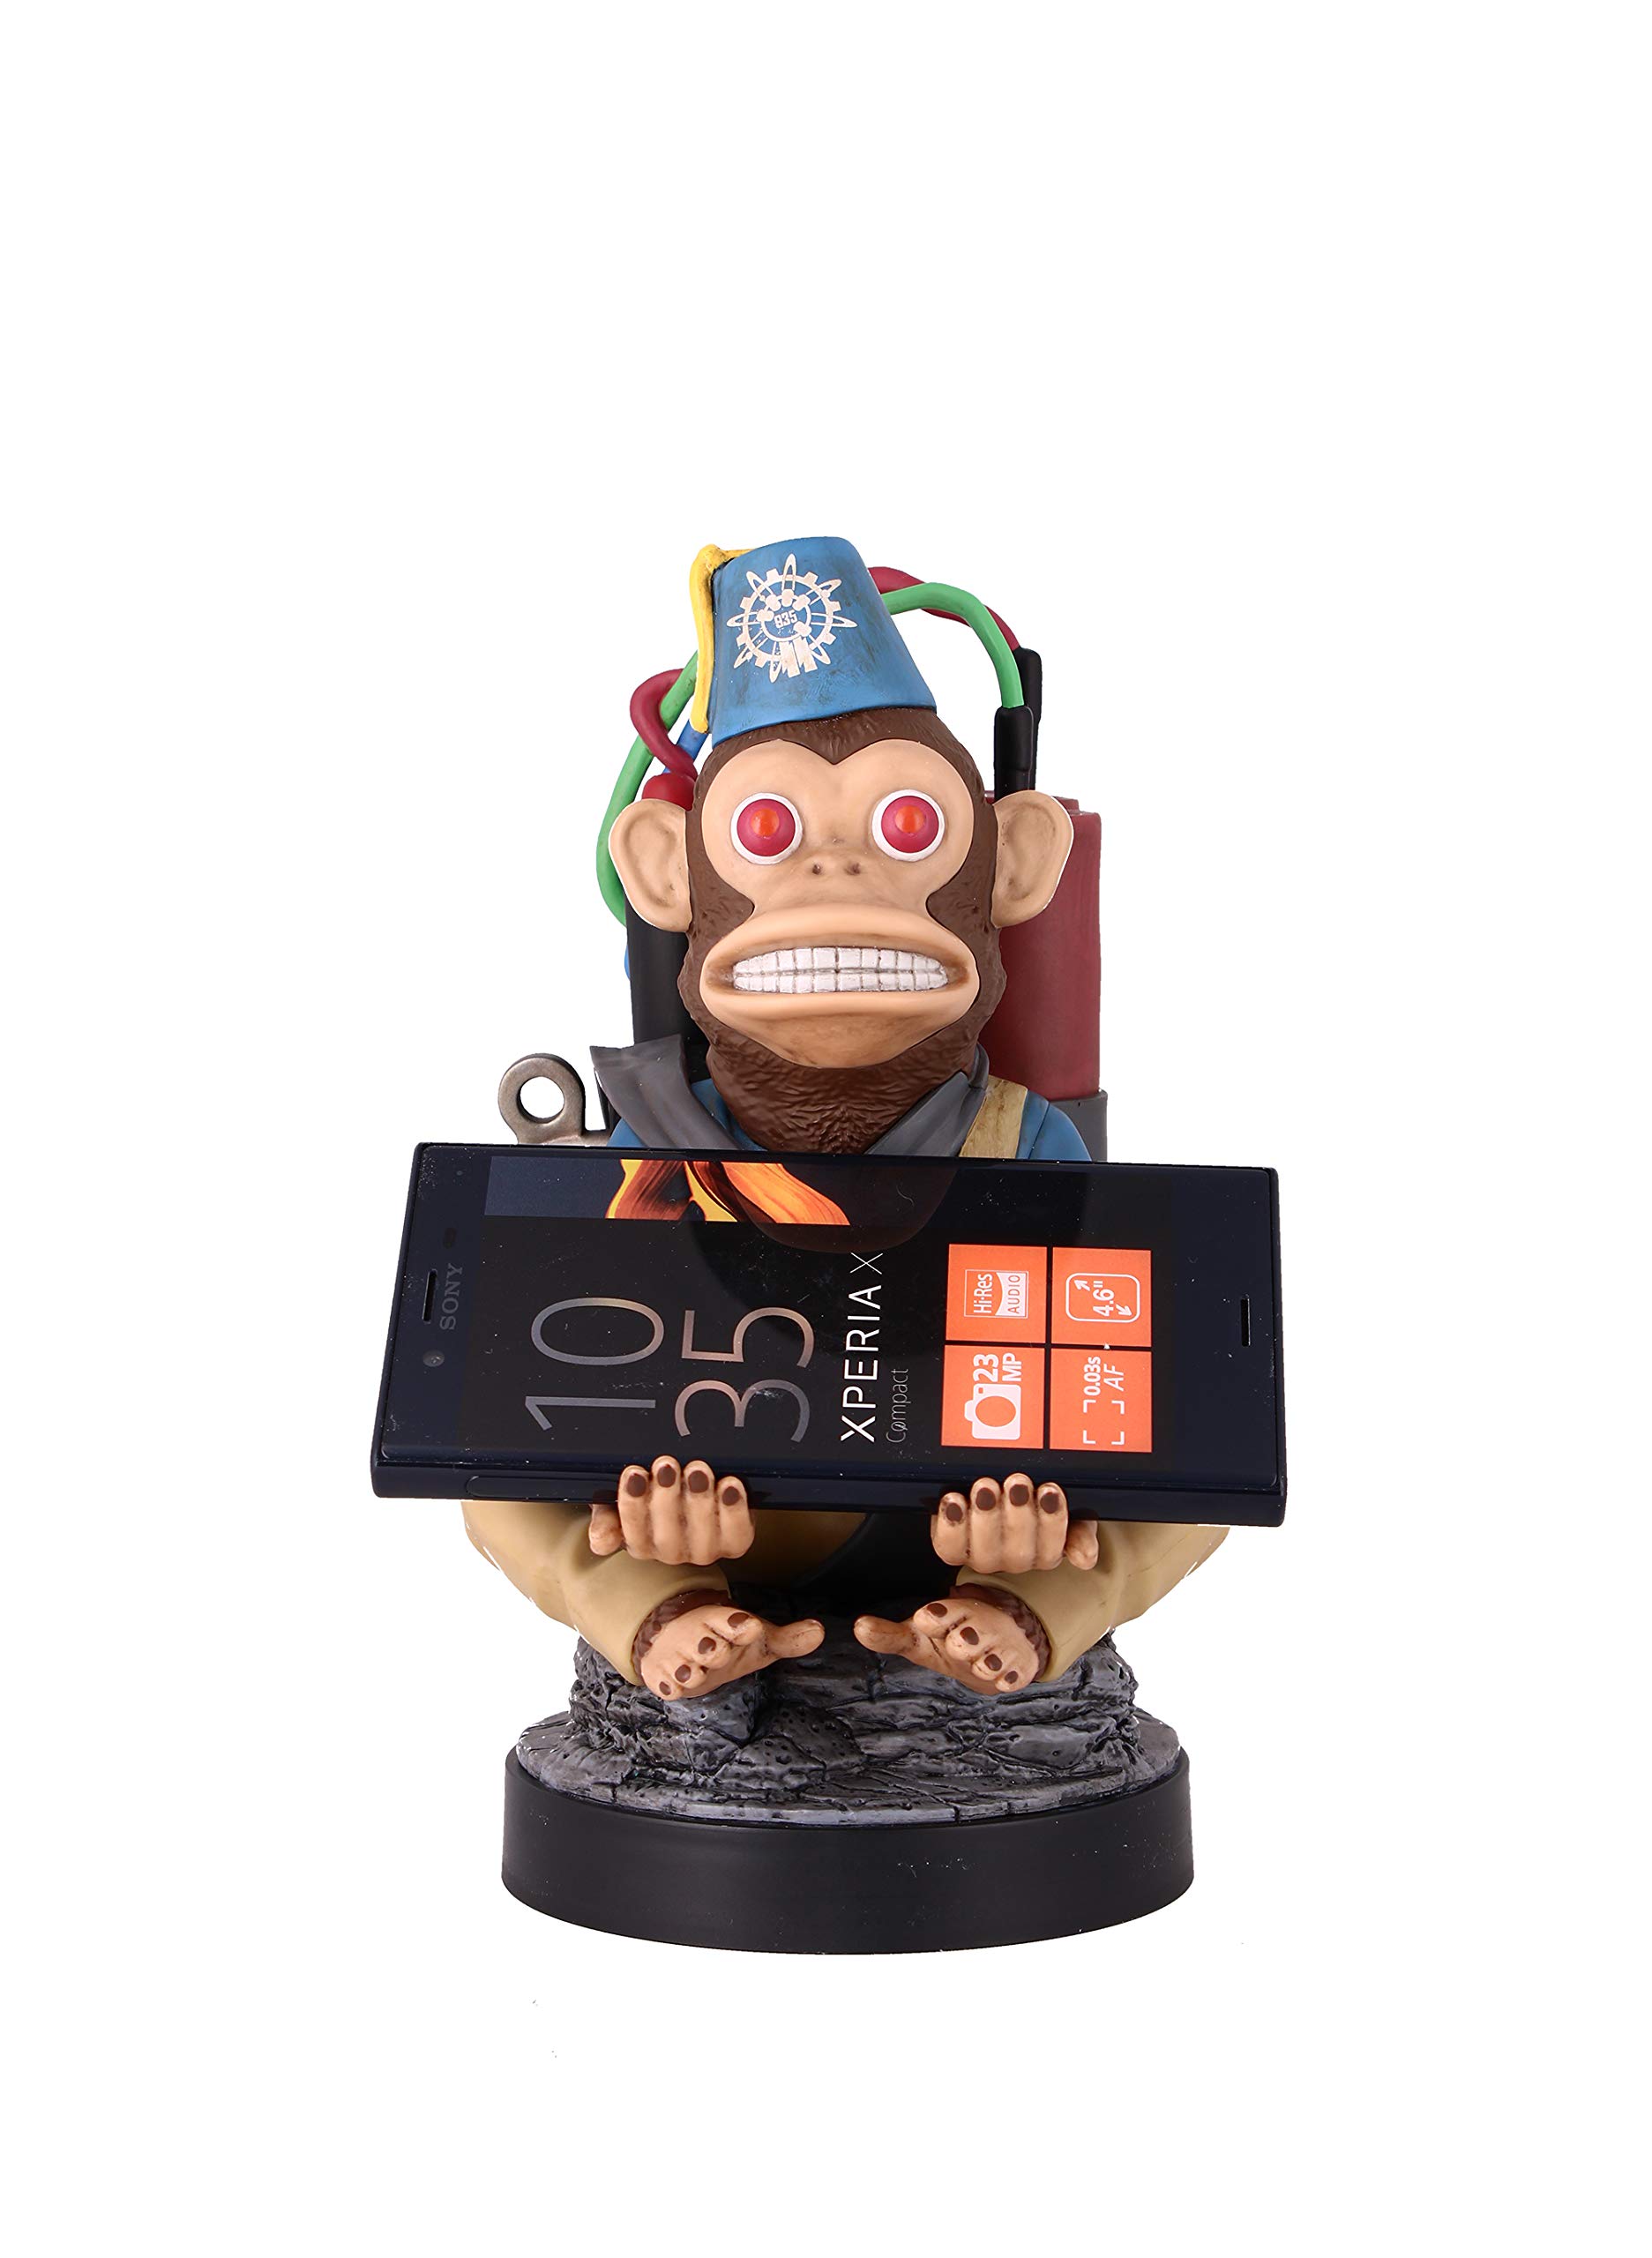 Exquisite Gaming: Call of Duty: Monkeybomb - Original Mobile Phone & Gaming Controller Holder, Device Stand, Cable Guys, Licensed Figure